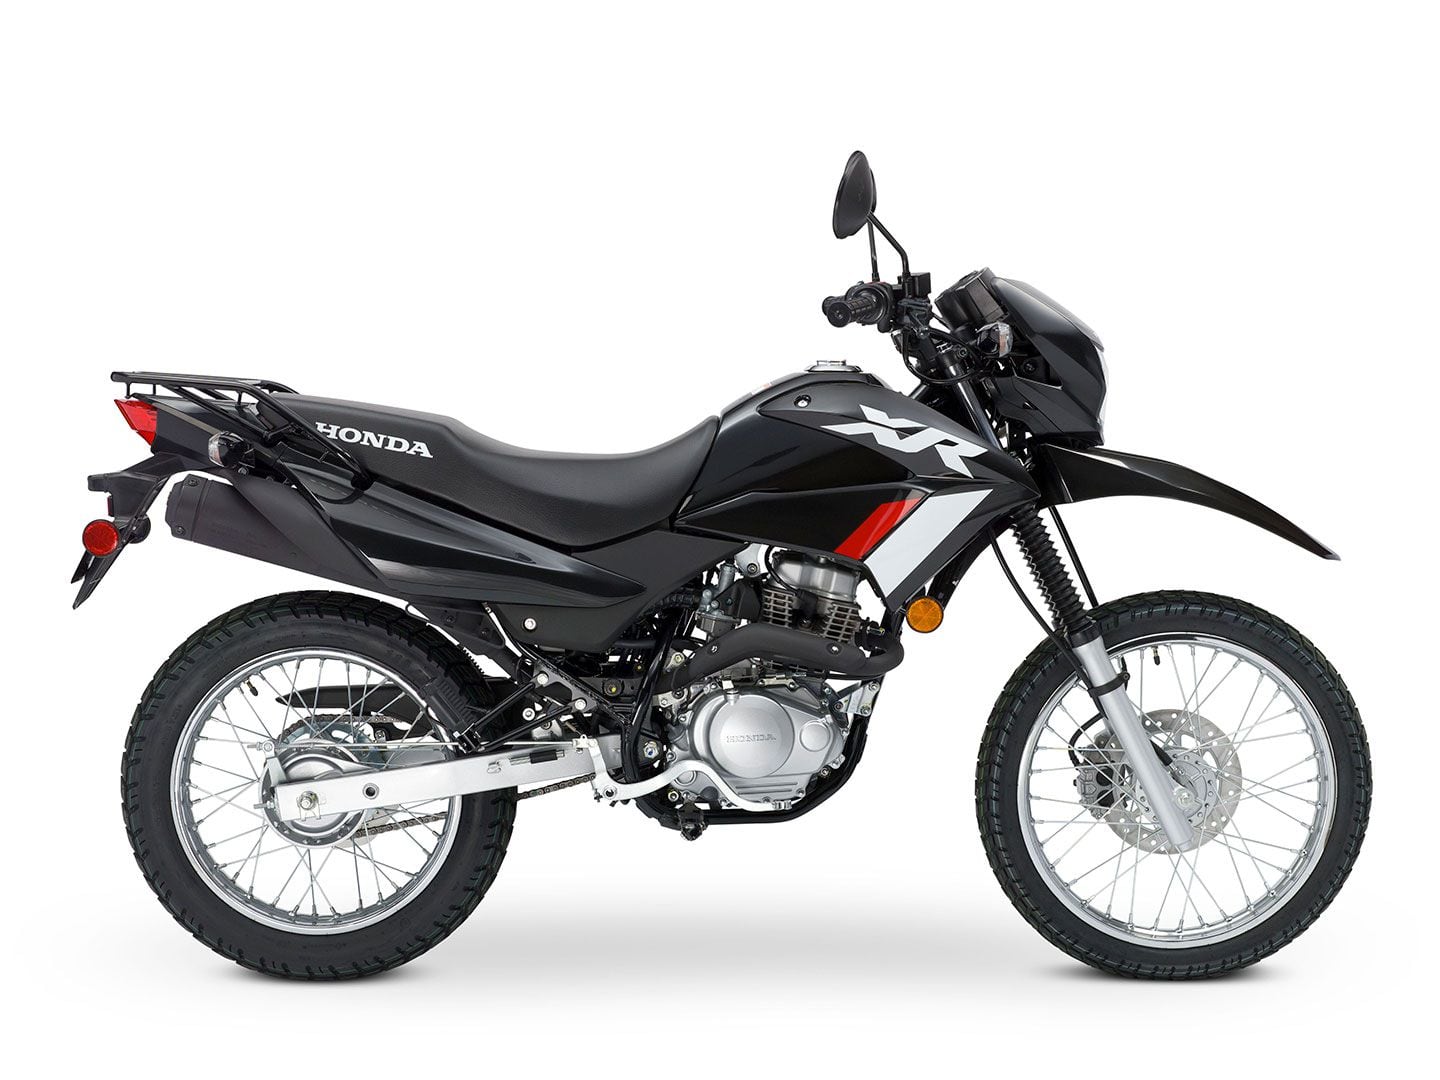 Honda’s ultra-affordable XR150L will work as around-town transportation, a tool for escaping the campground, or short dual sport rides out of town.